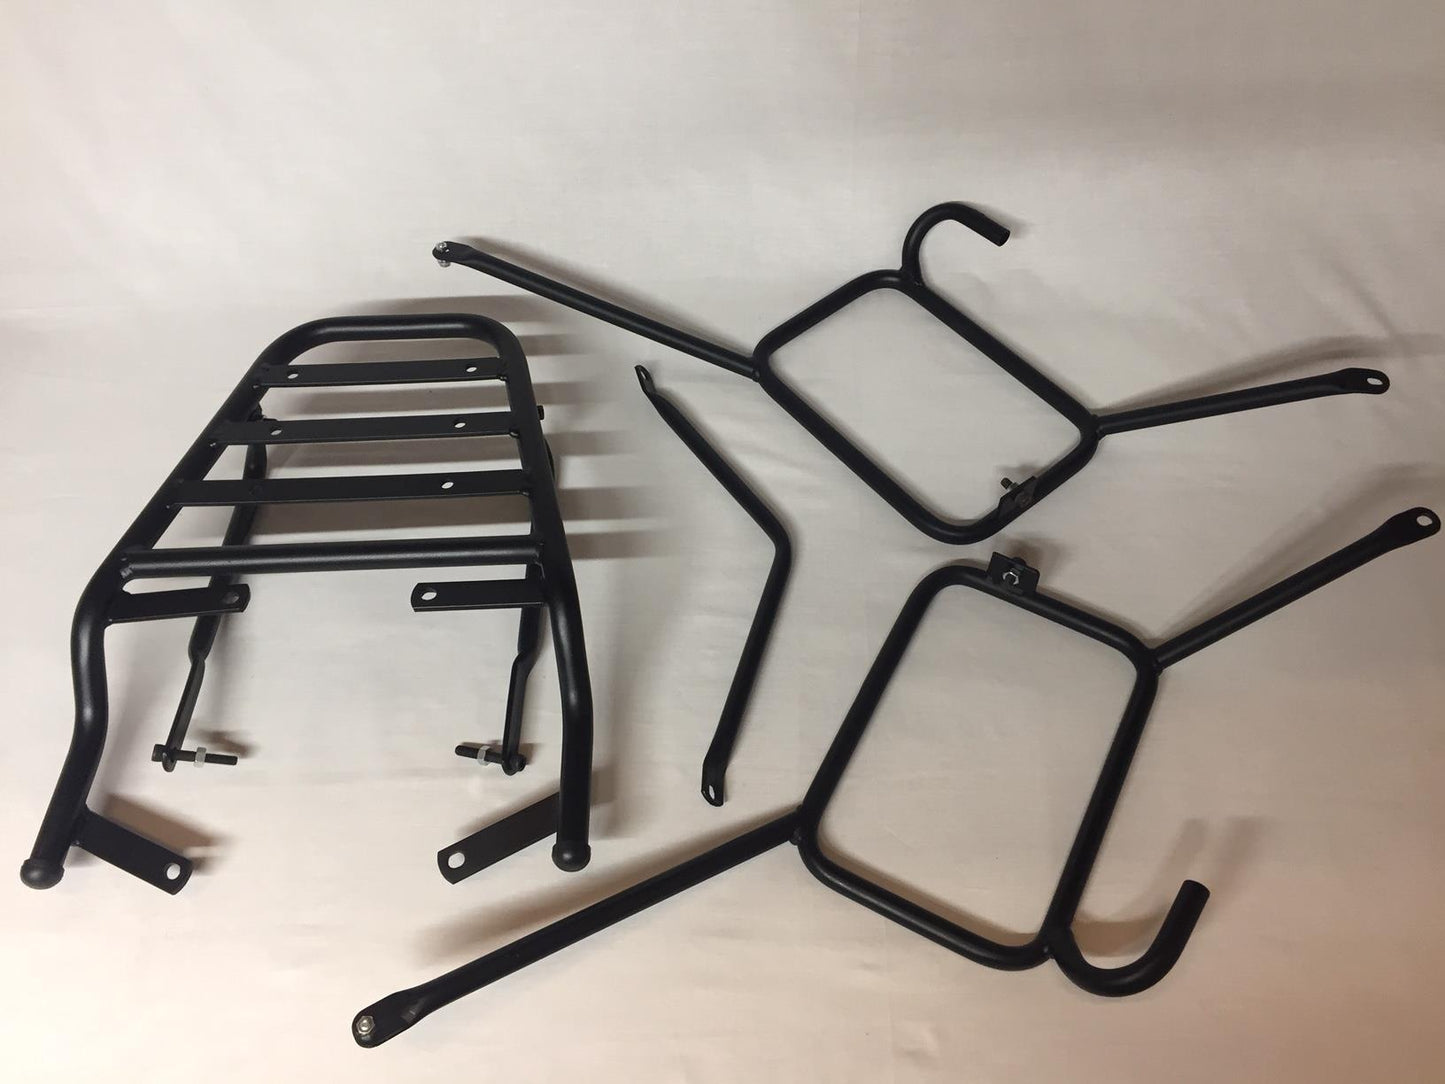 Yamaha MT09 Tracer rear and pannier rack set luggage carrier full set  15-17